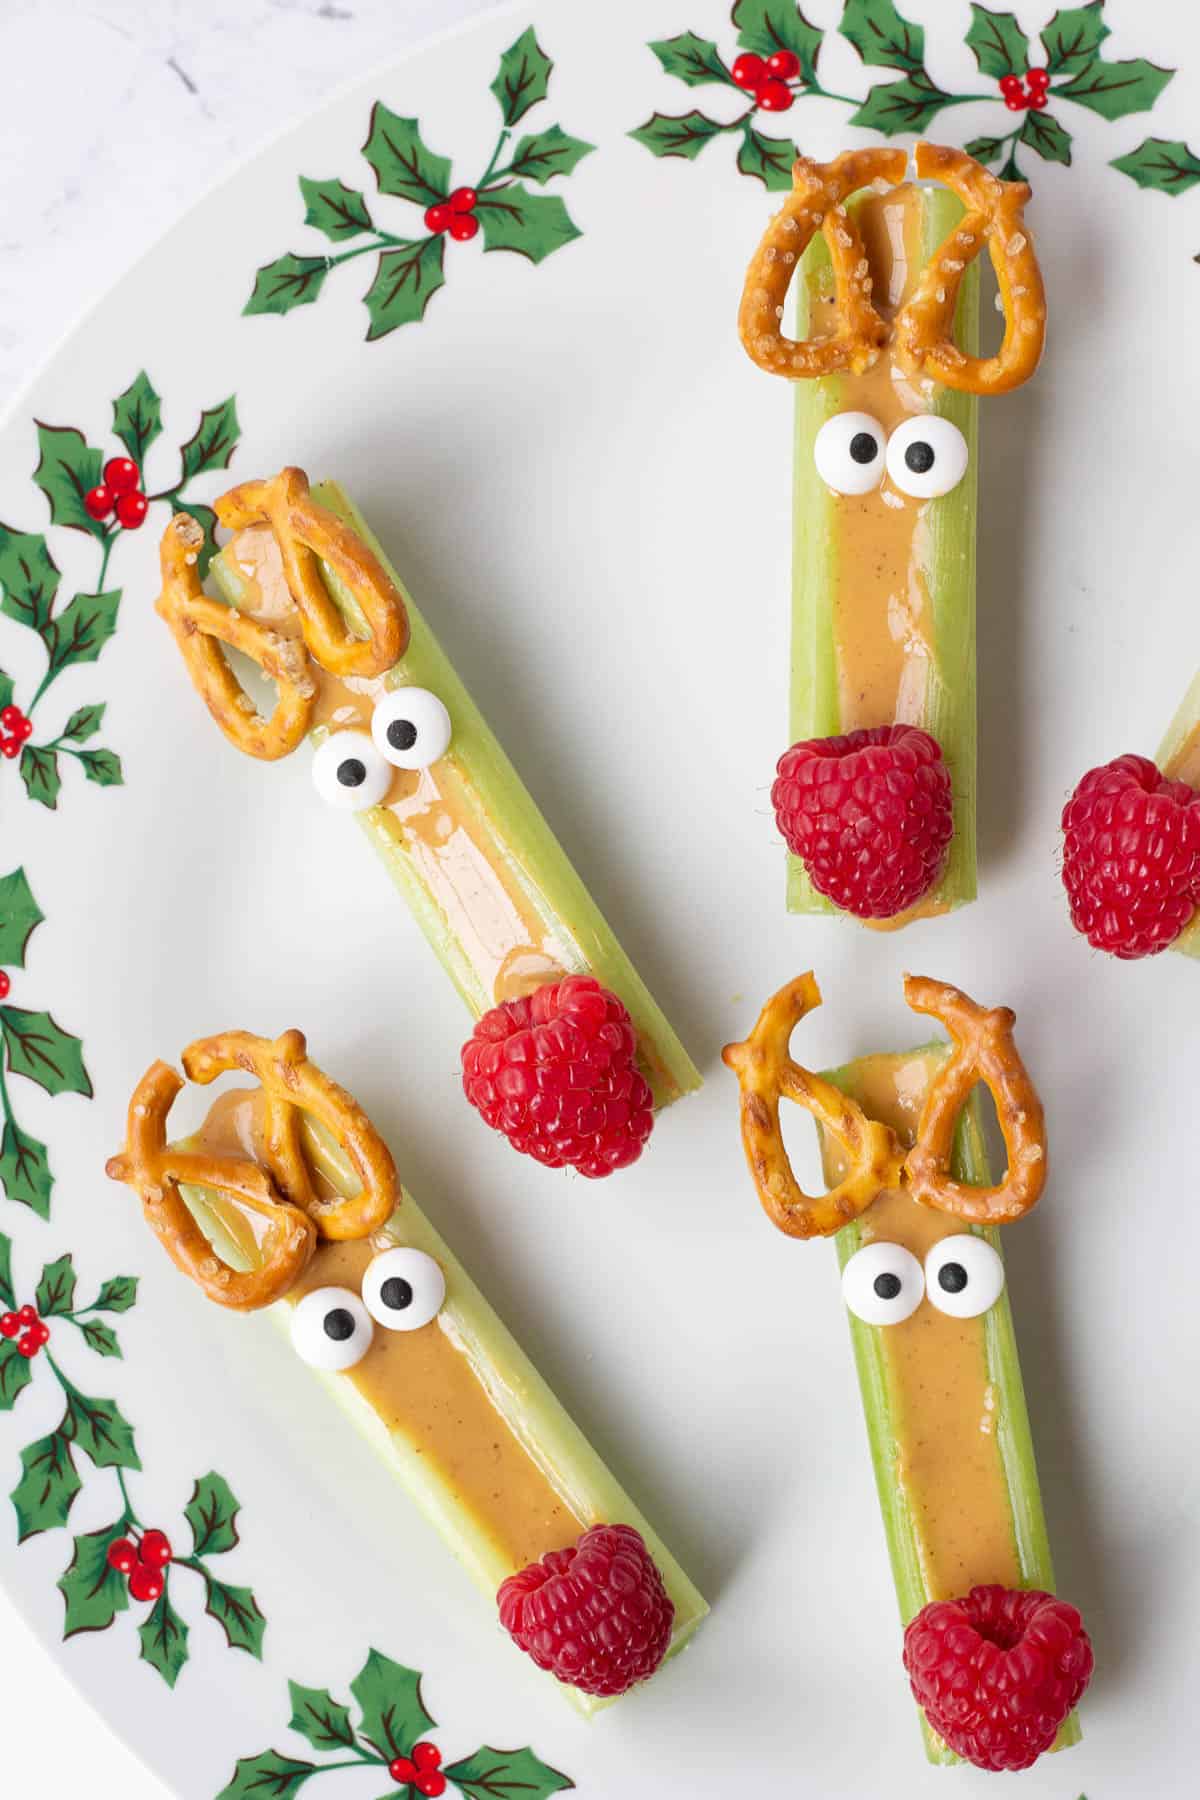 reindeer celery snacks with peanut butter, pretzels, candy eyes, and a raspberry nose